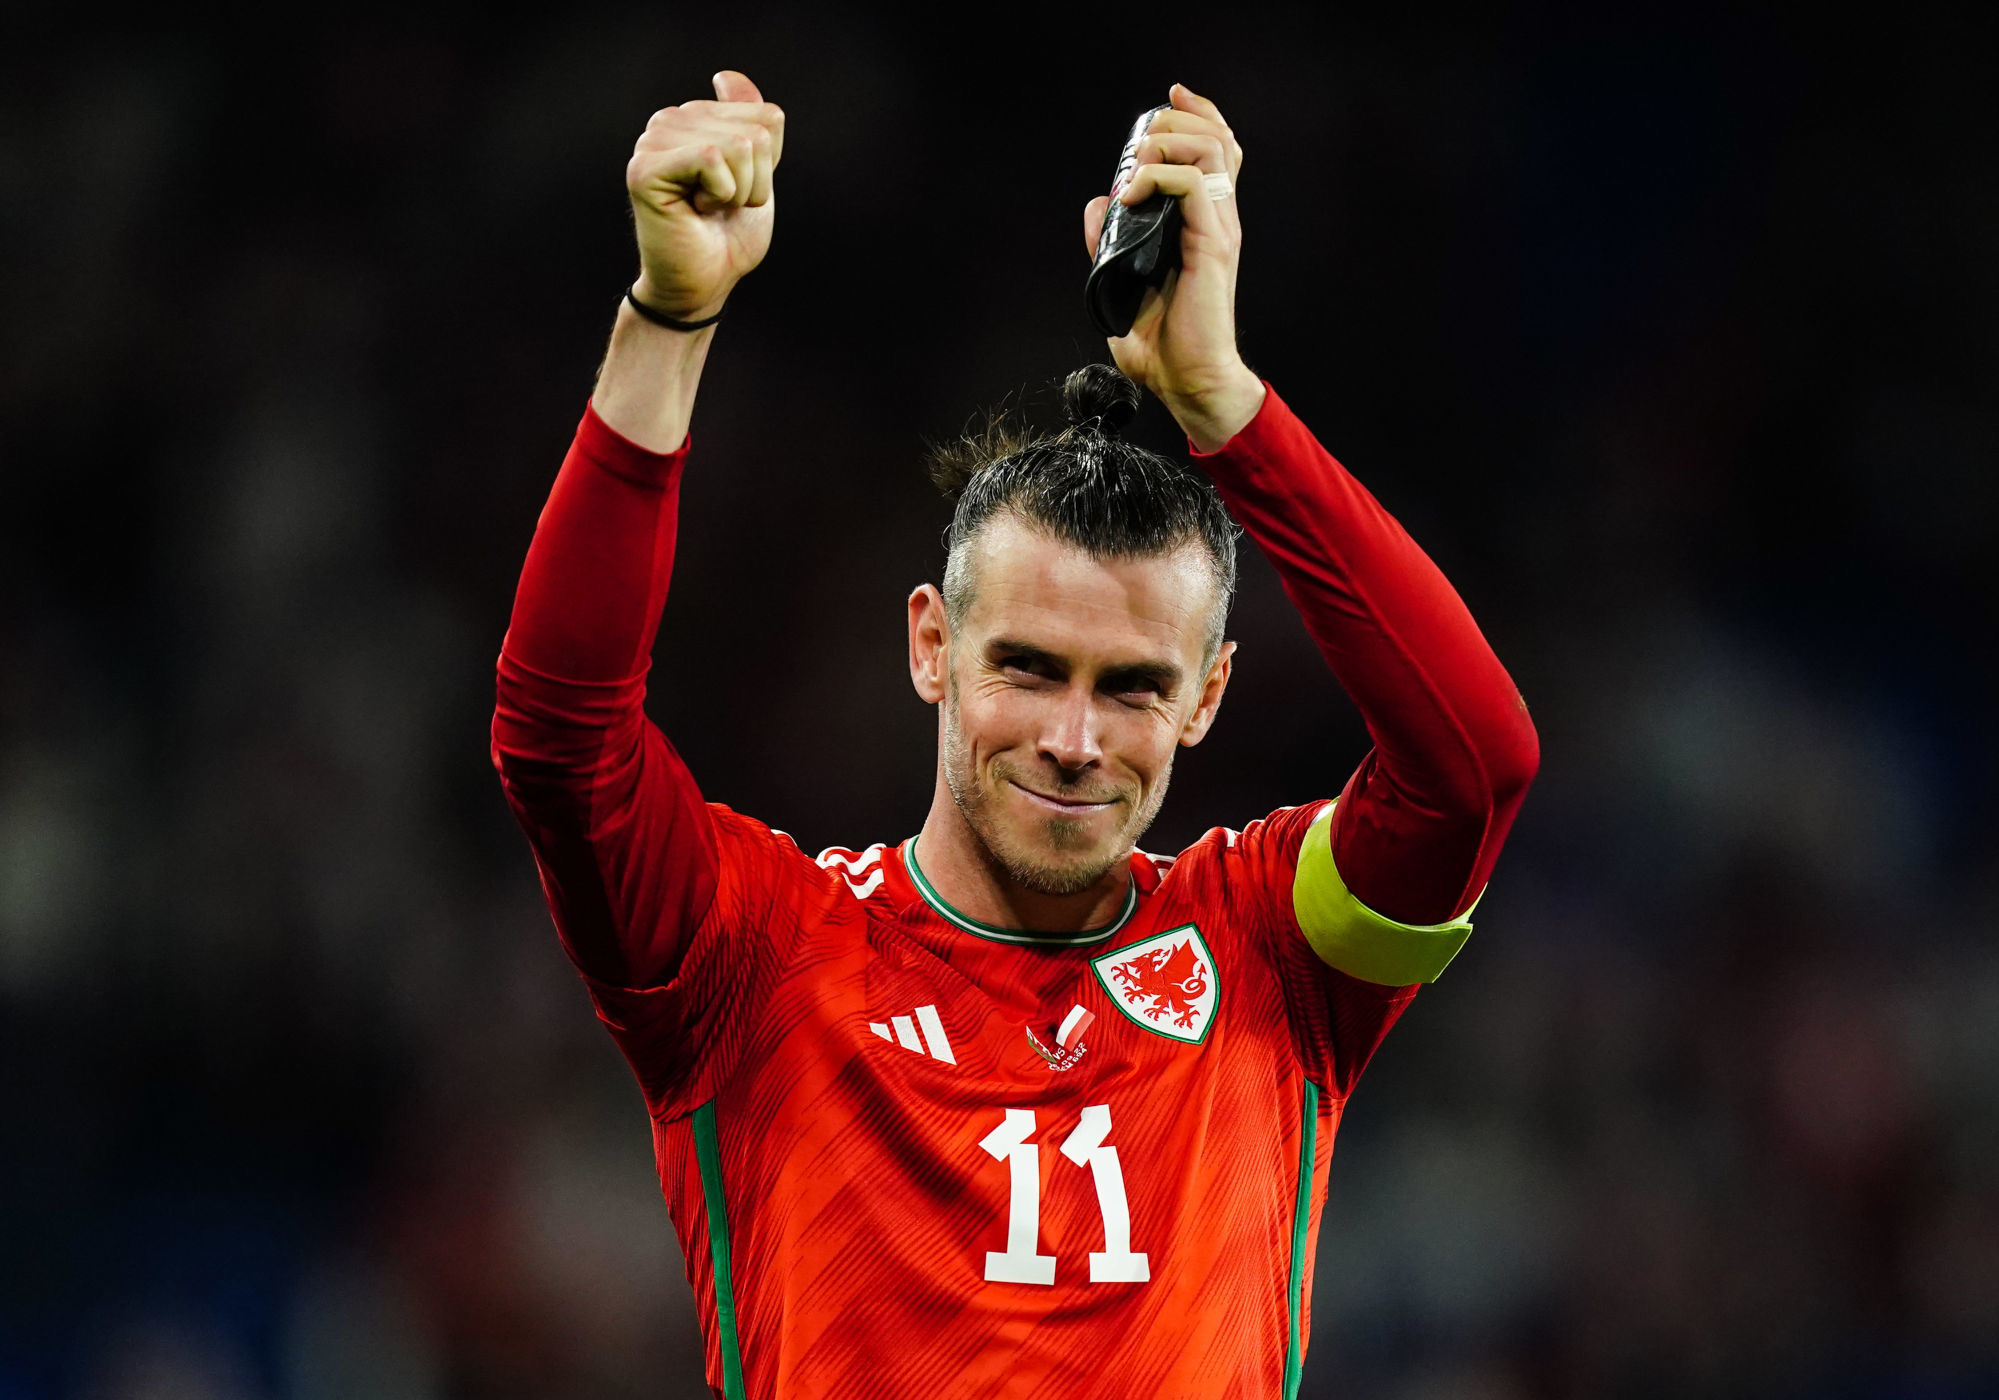 Football Great Gareth Bale Announces Retirement From Professional